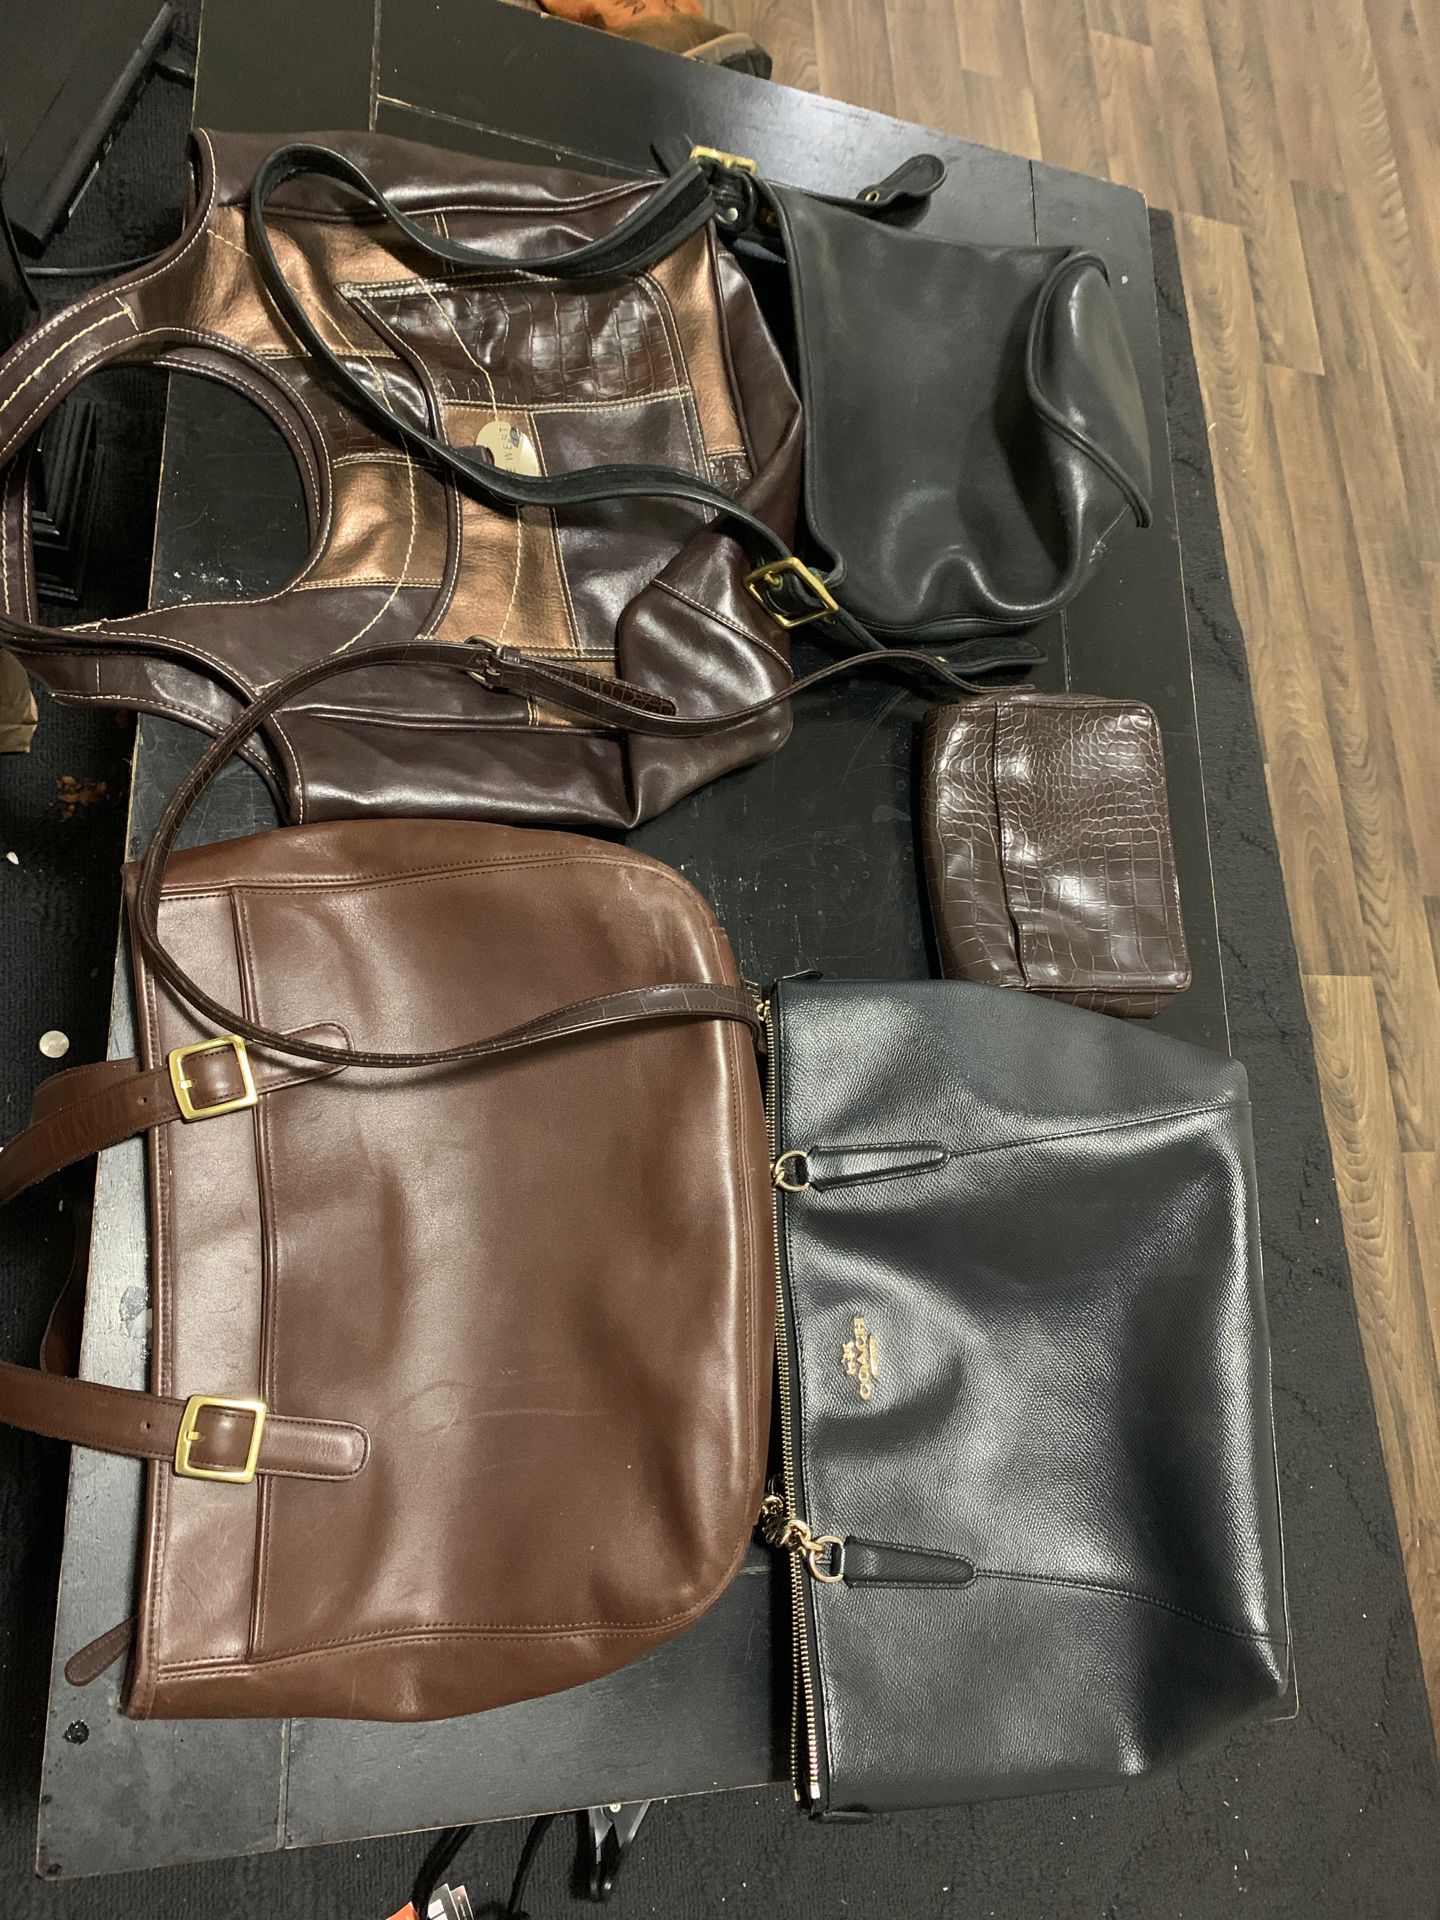 5 Purses All leather Coach and Nine West